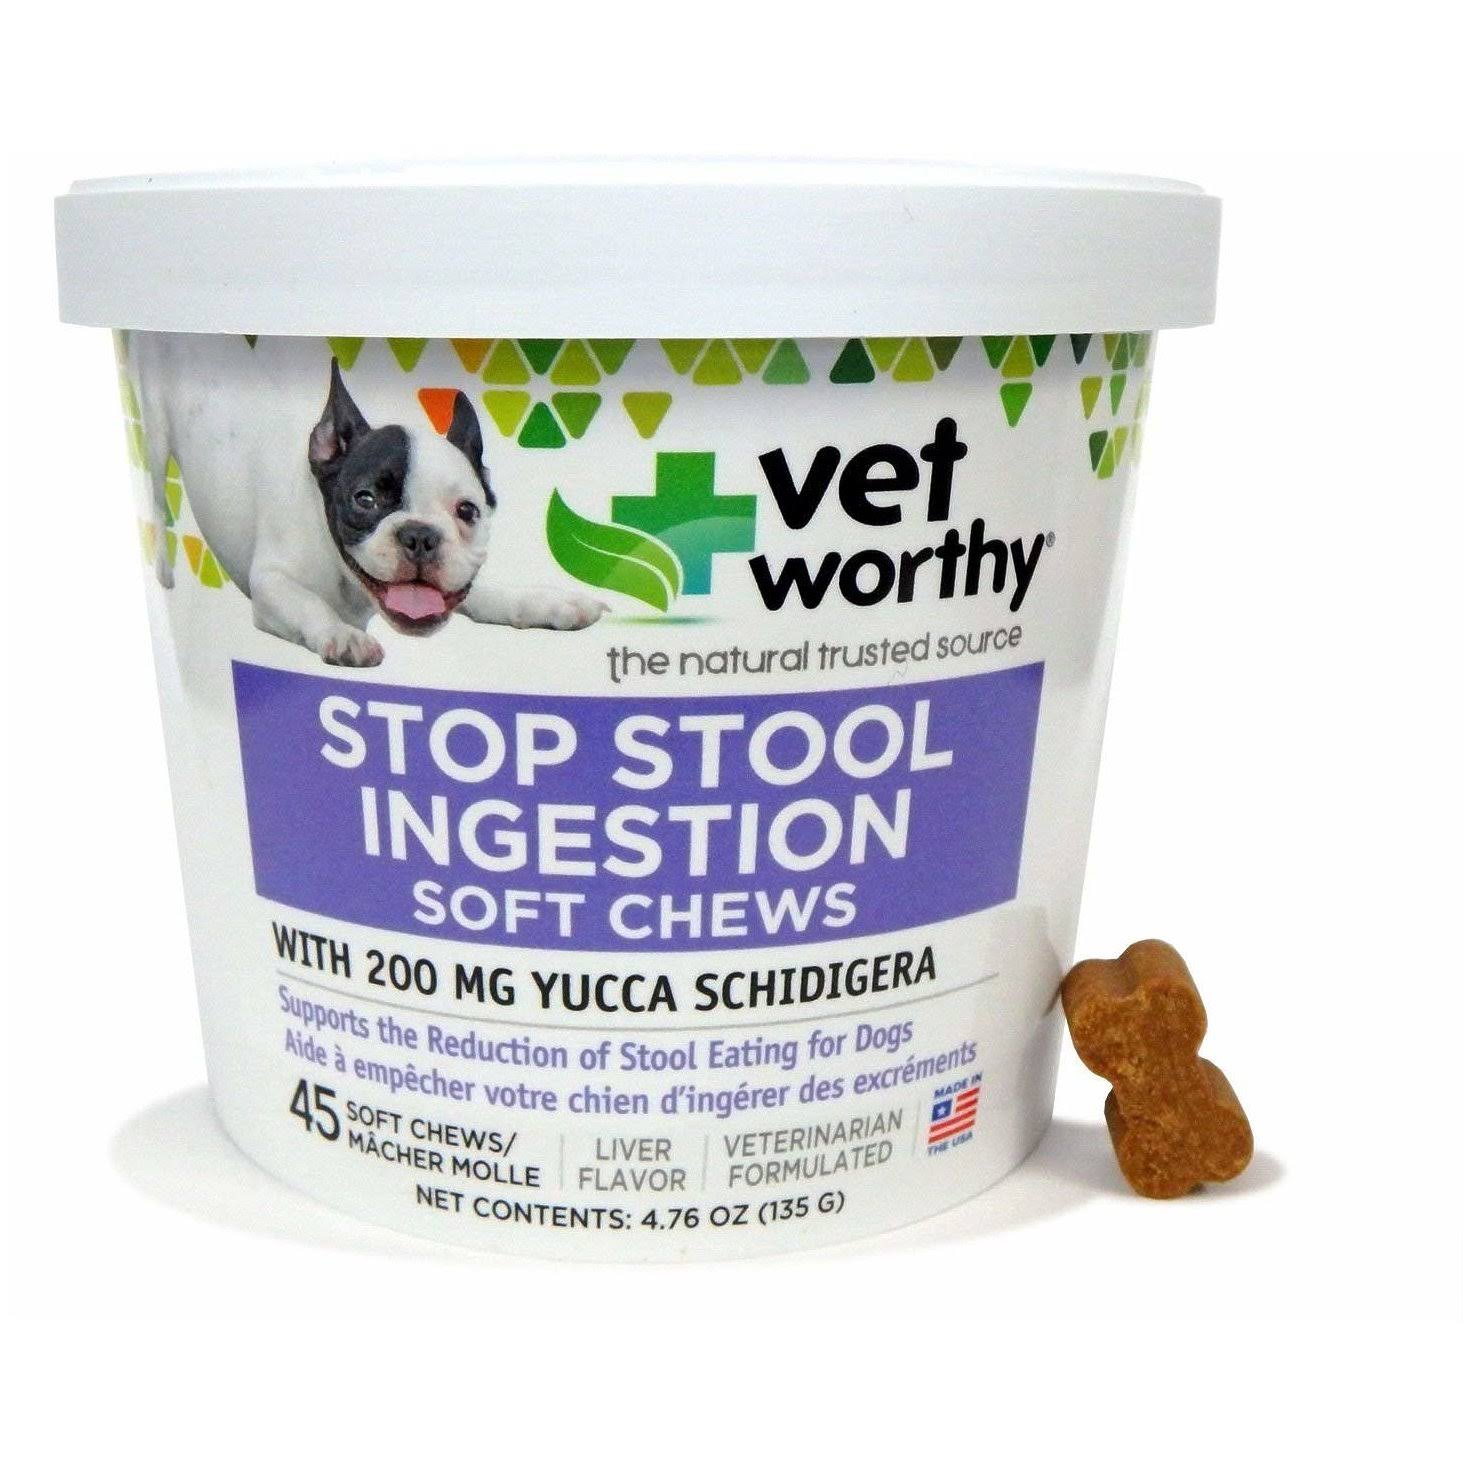 Vet Worthy Stop Stool Ingestion for Dogs (45 Soft Chews)